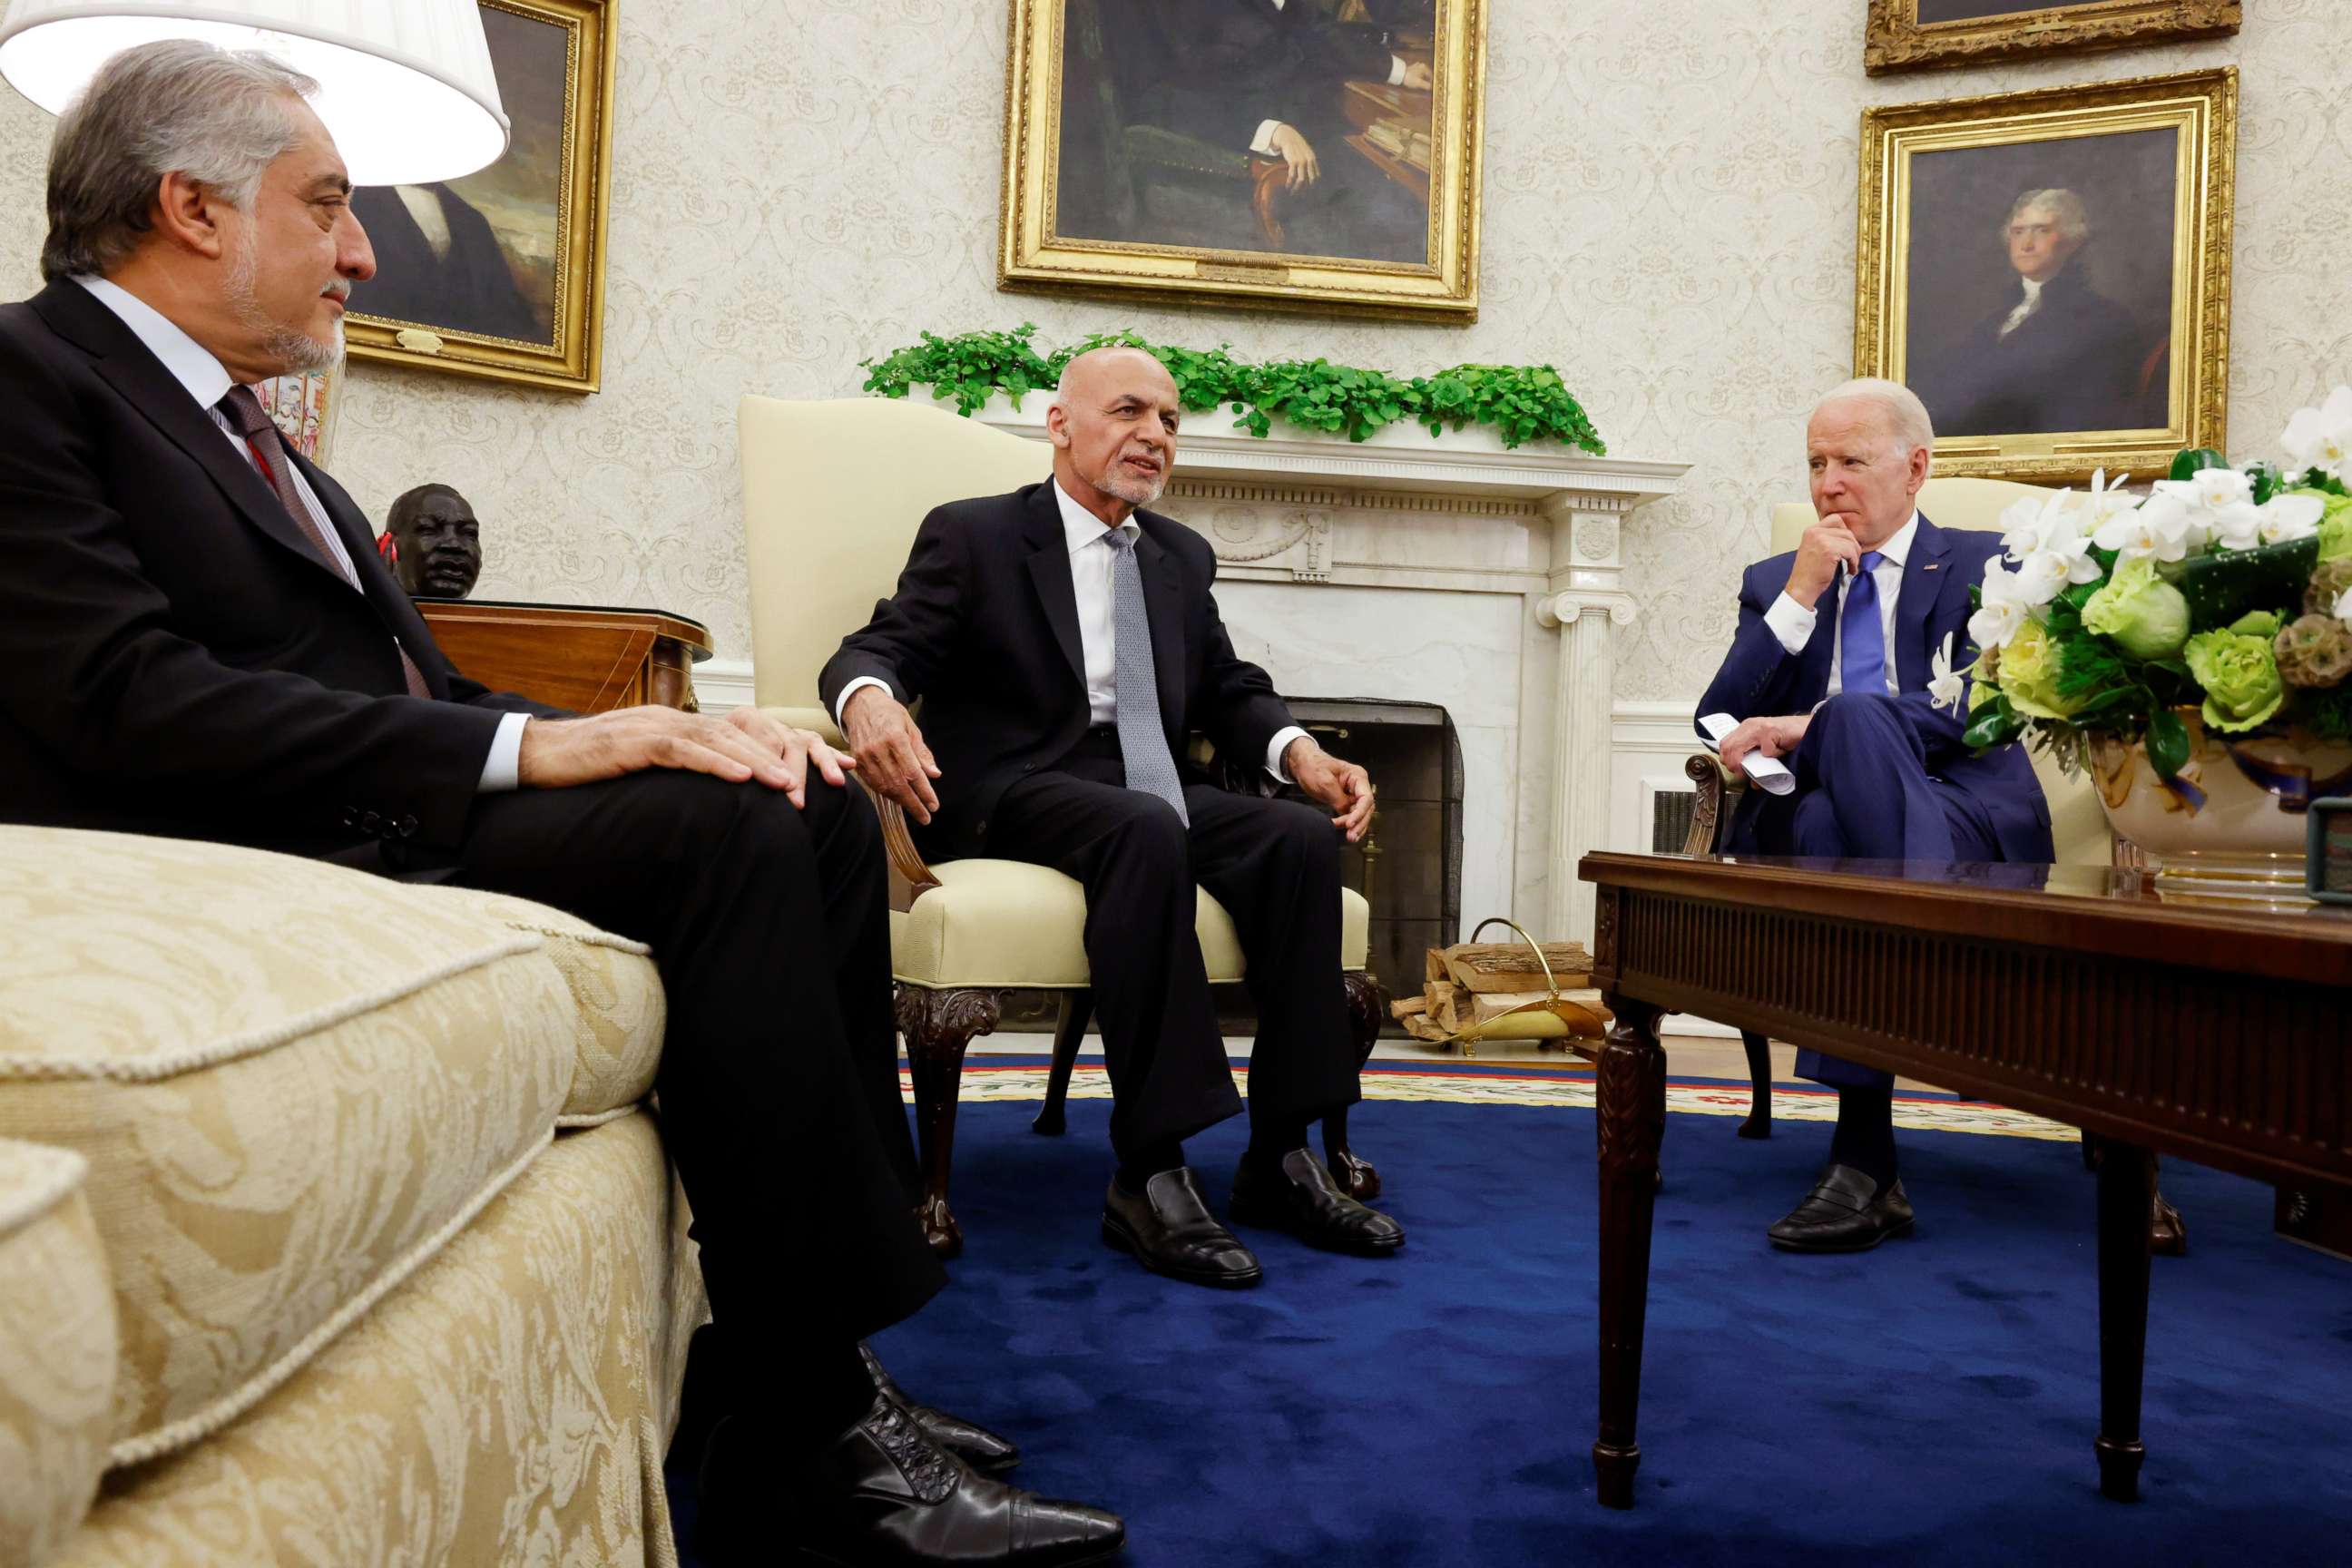 PHOTO: President Joe Biden meets with Afghan President Ashraf Ghani and Chairman of Afghanistan's High Council for National Reconciliation Abdullah Abdullah at the White House in Washington, June 25, 2021.